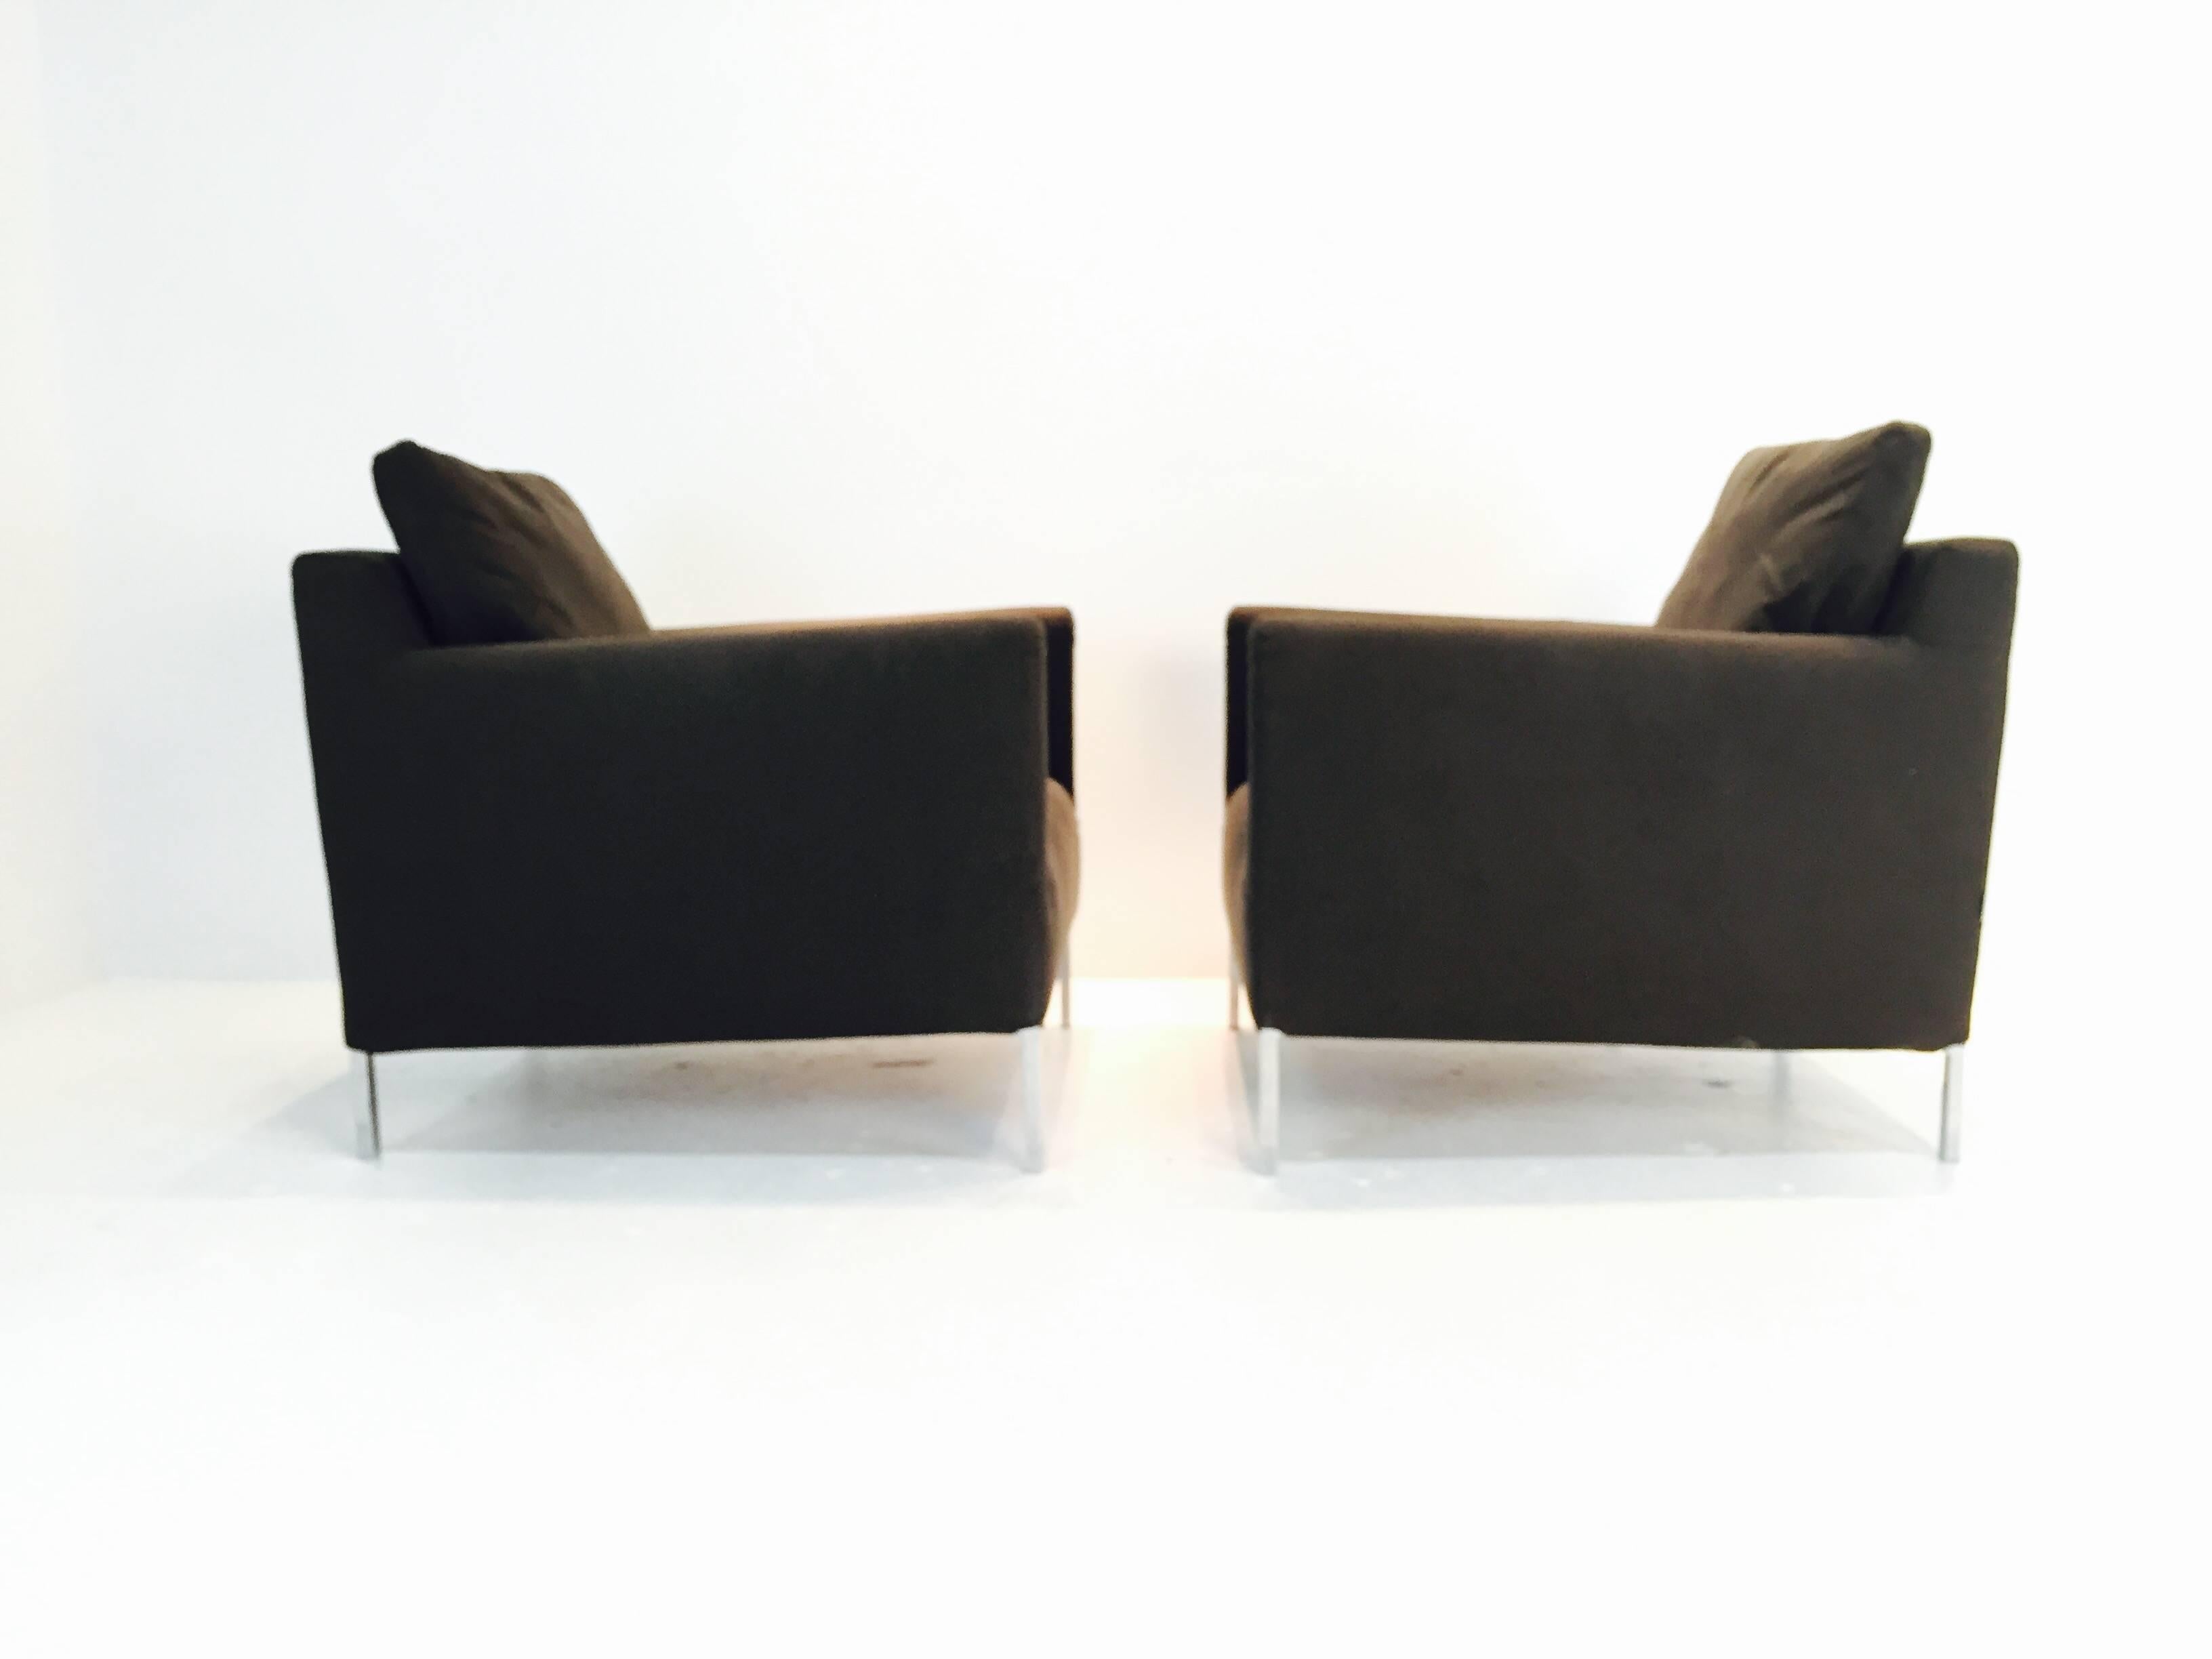 Pair of B&B Italia Solo Chairs by Antonio Citterio. In as found condition with minor signs of wear.